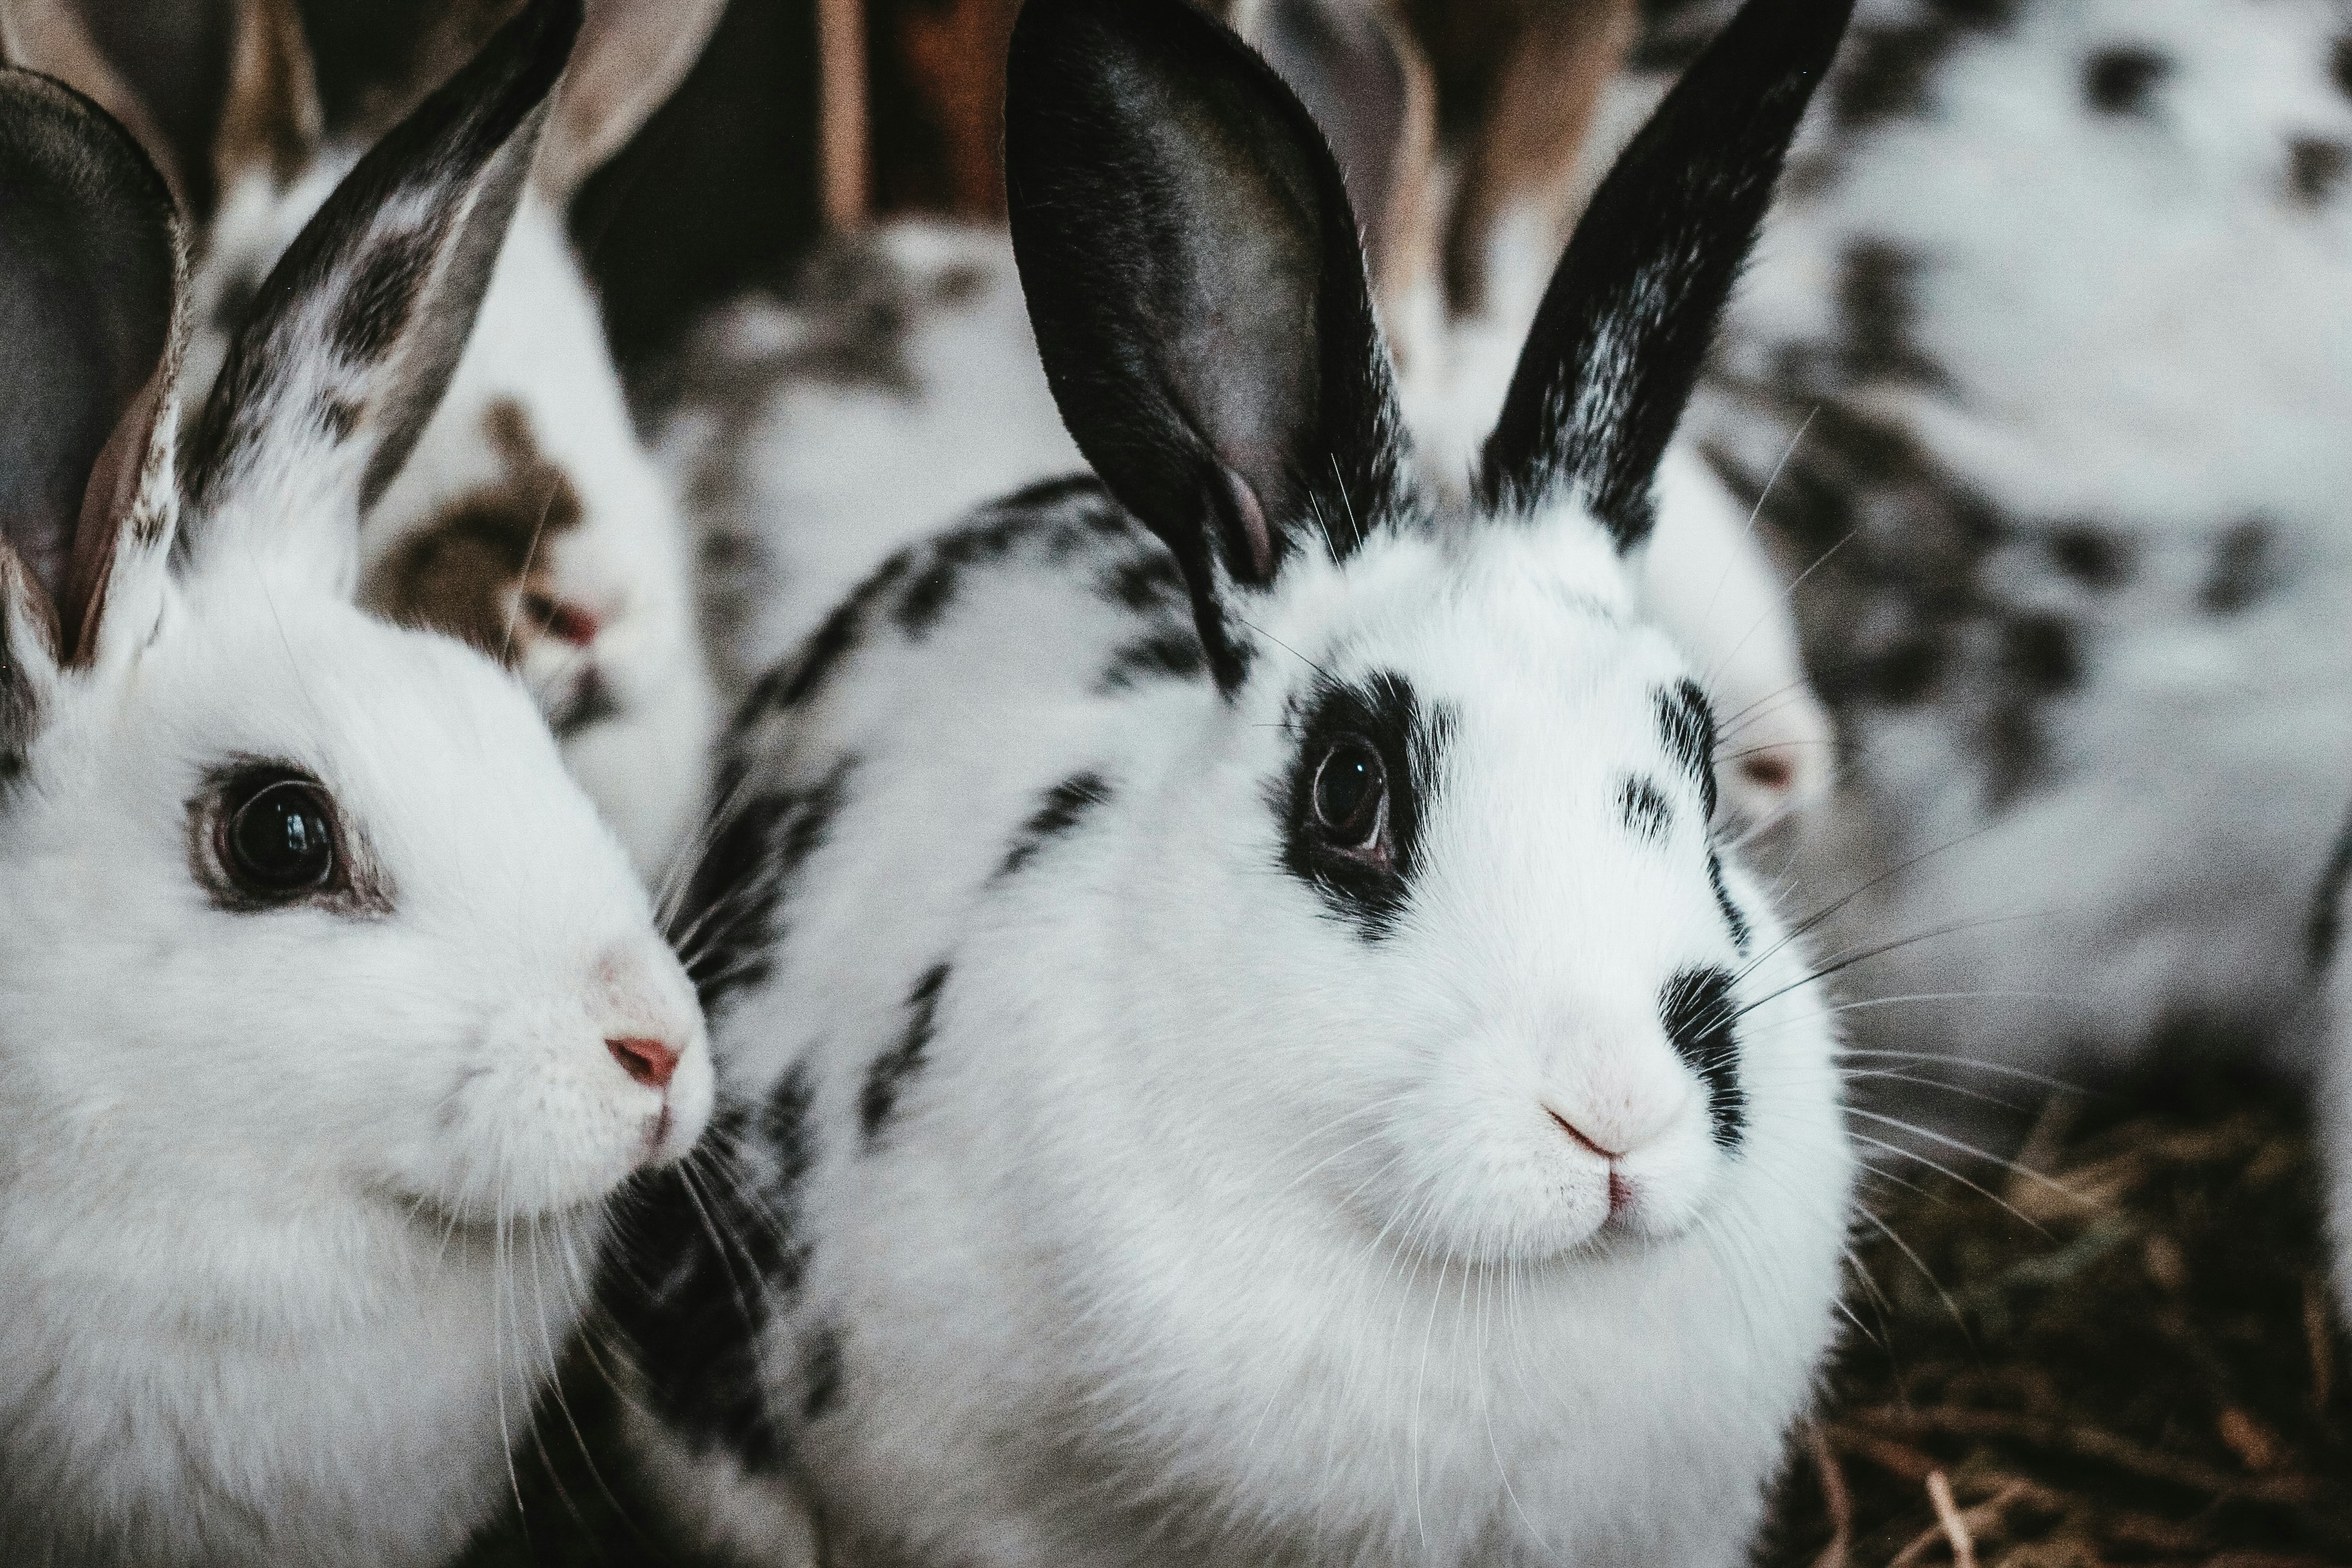 white and black rabbit in close up photography